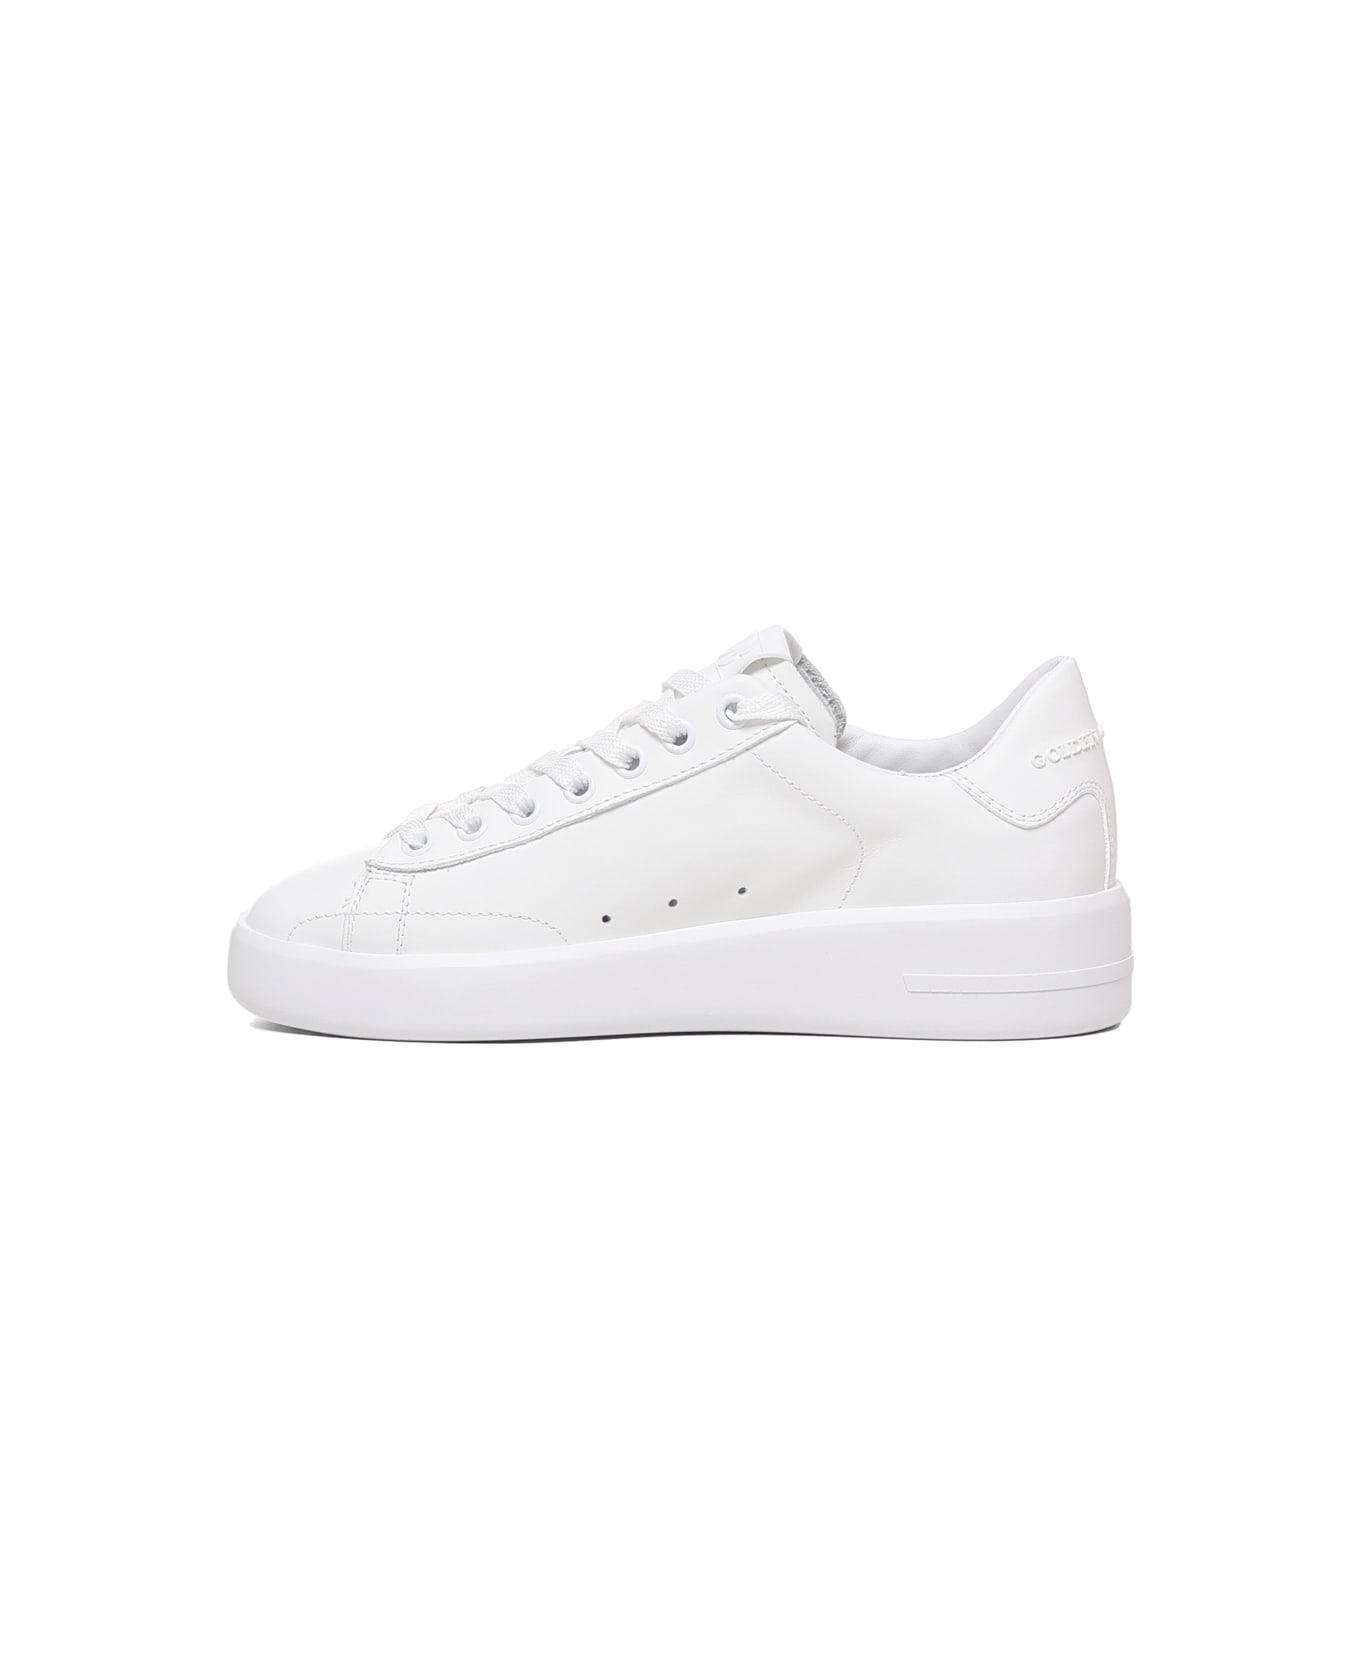 Golden Goose Pure New Sneakers In Leather With Contrasting Heel Tab - White スニーカー